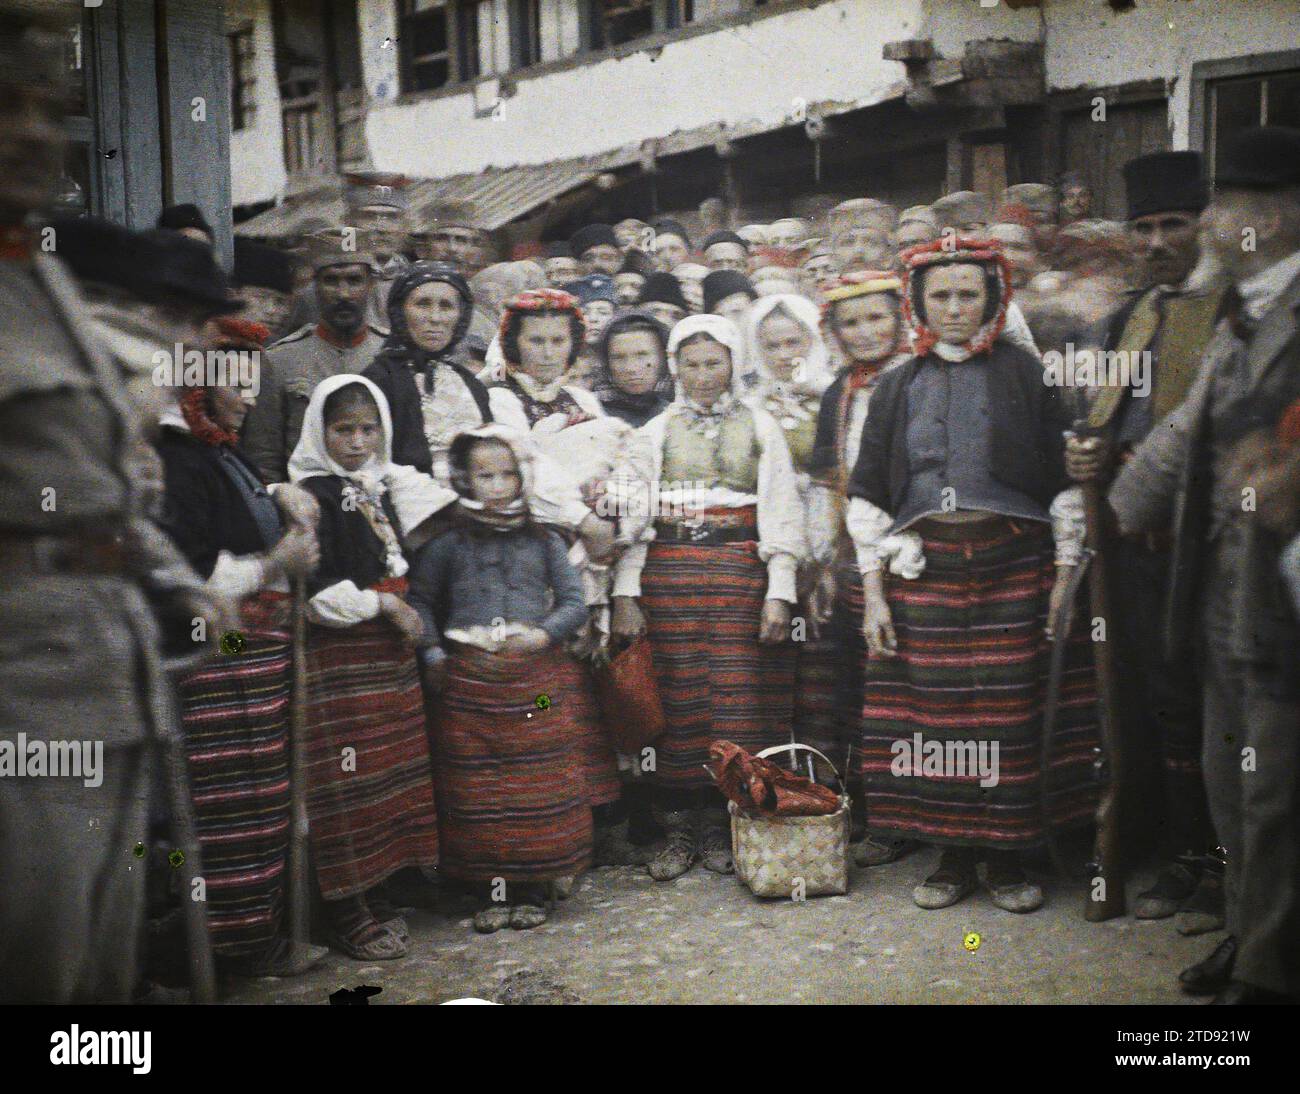 Pristina, Kosovo, Serbia Group of Peasant Women, Human Beings, Clothing, International Relations, HD, Society, Woman, Military Uniform, Costume, Foreign Presence, Crowd, exists in high definition, Group Portrait, Peasant, Army, Serbia, Pristina, Group of peasant women from Kosovo, Pristina, 04/05/1913 - 04/05/1913, Léon, Auguste, photographer, 1913 - Balkans - Léon Busy and Auguste Léon - (23 April - 9 June), Autochrome, photo, Glass, Autochrome, photo, Positive, Horizontal, Size 9 x 12 cm Stock Photo